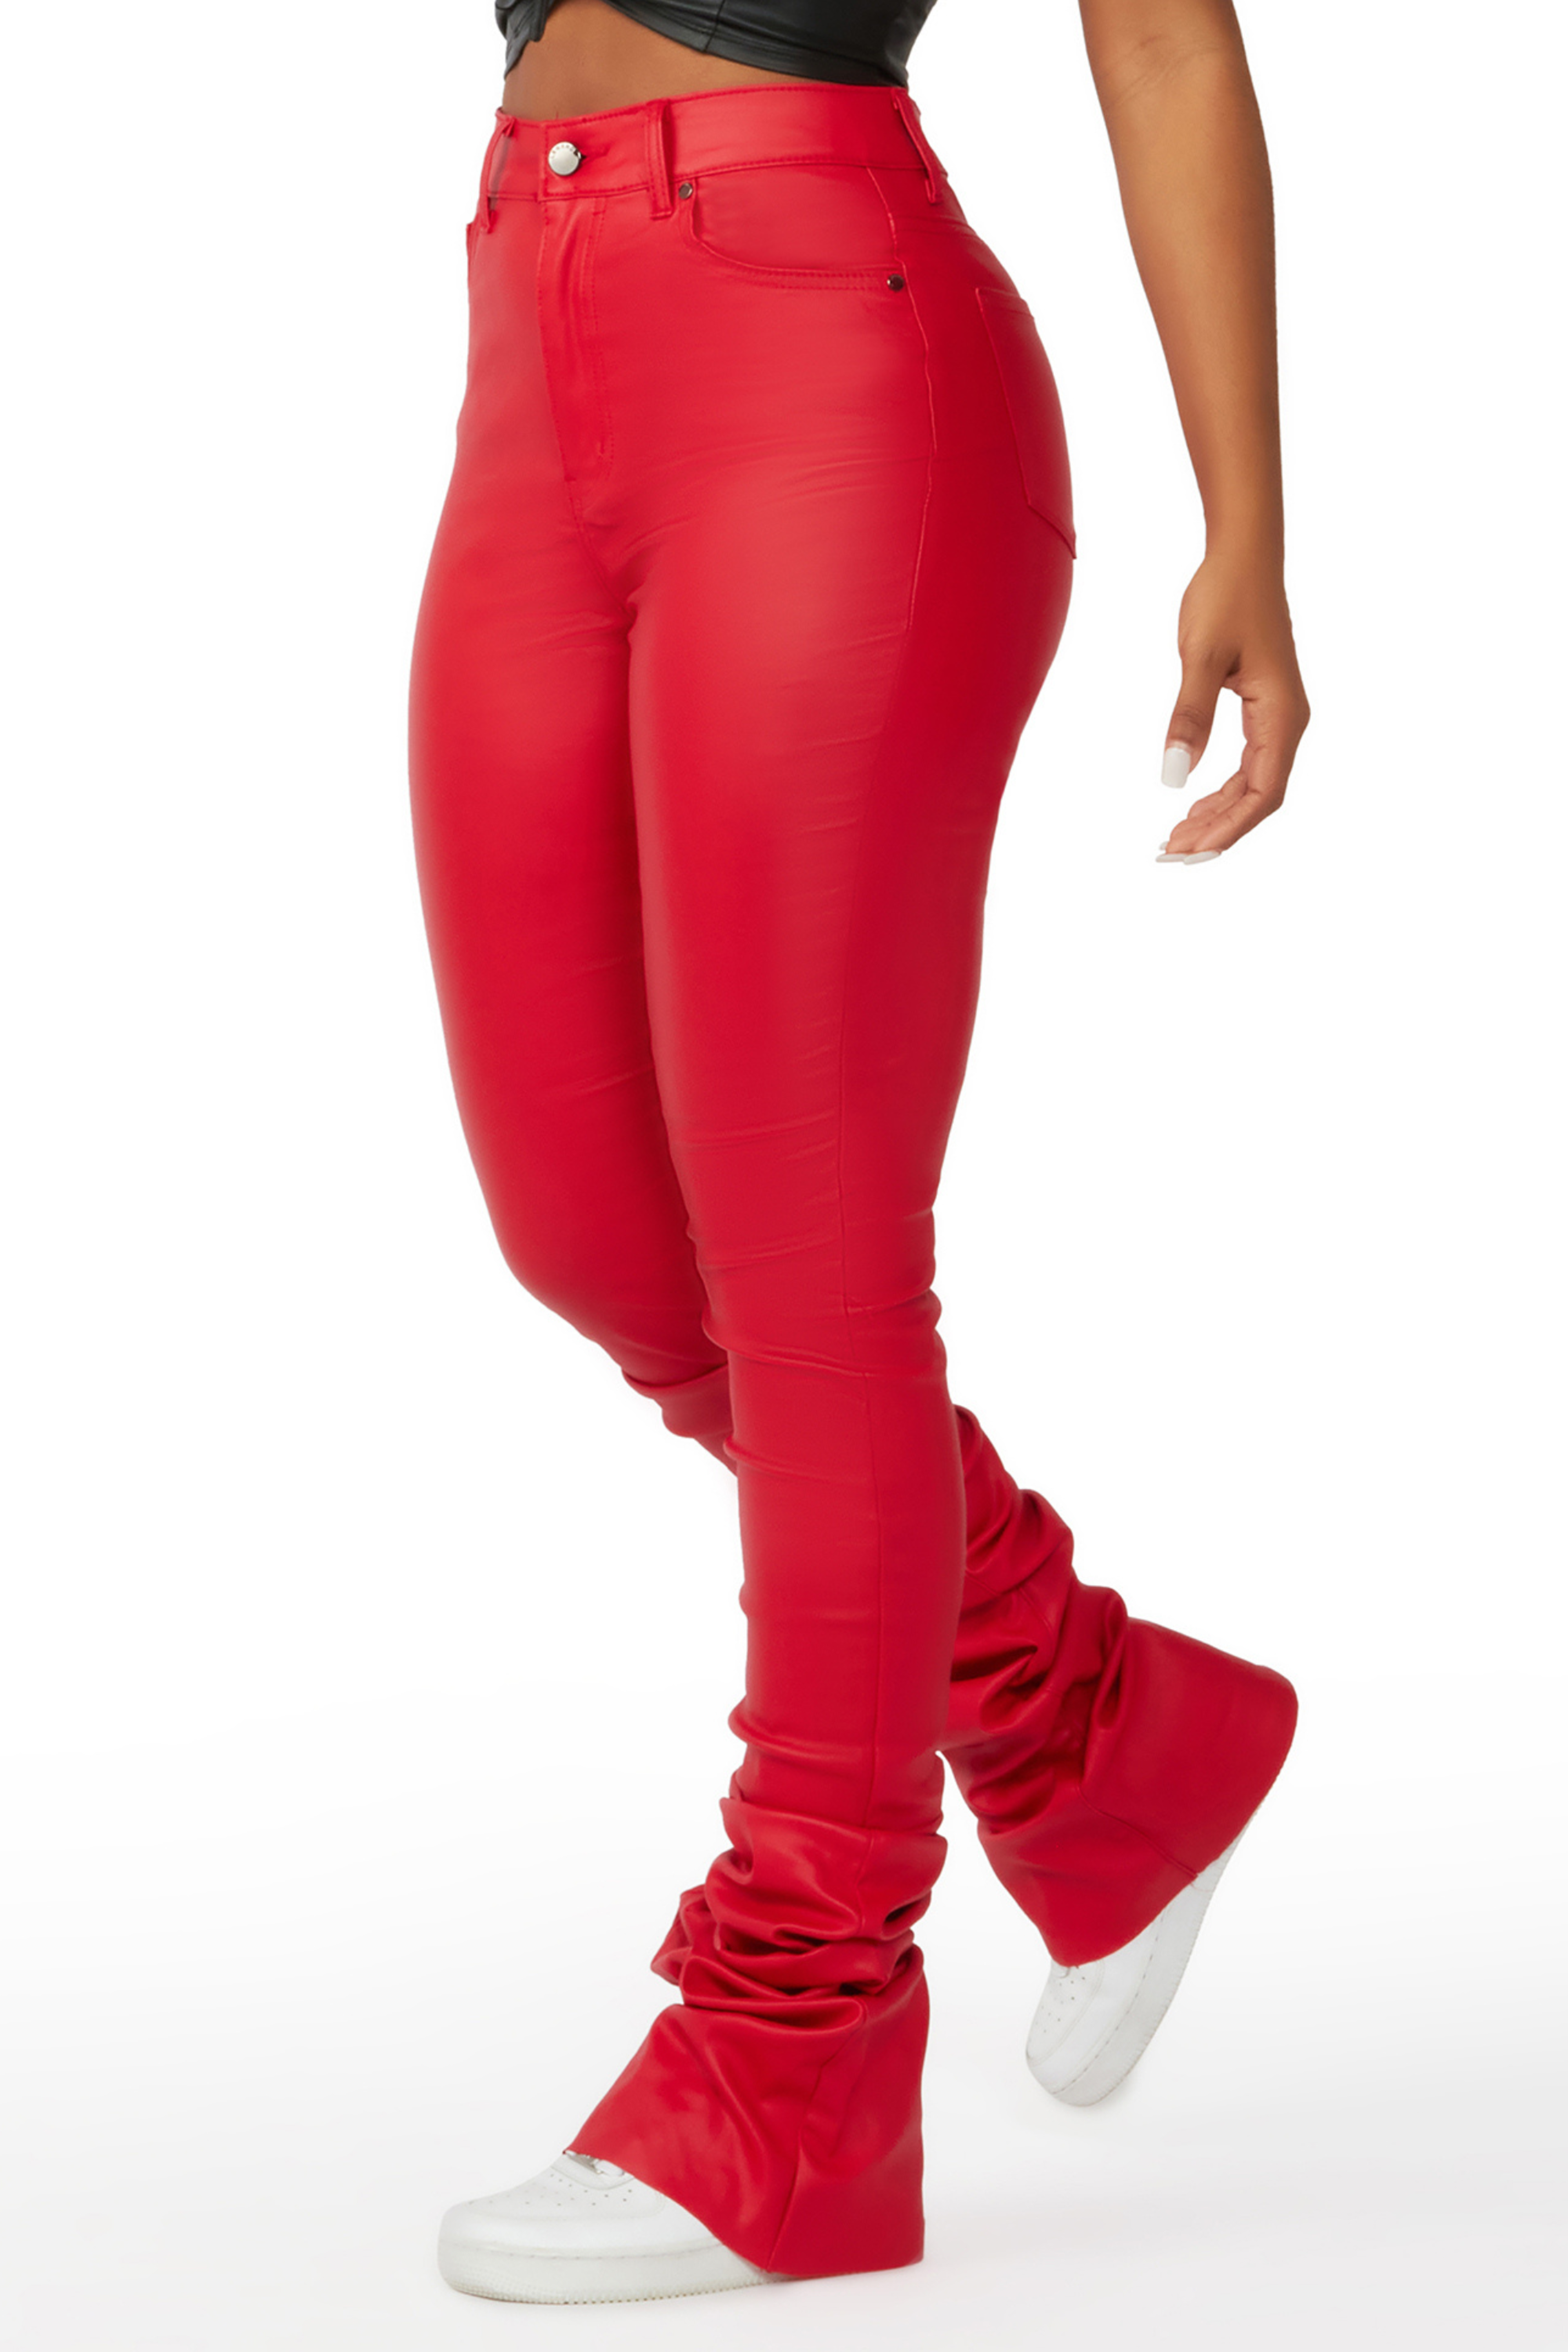 Alternate View 1 of Pay Attention Red PU Super Stacked Flare Pant